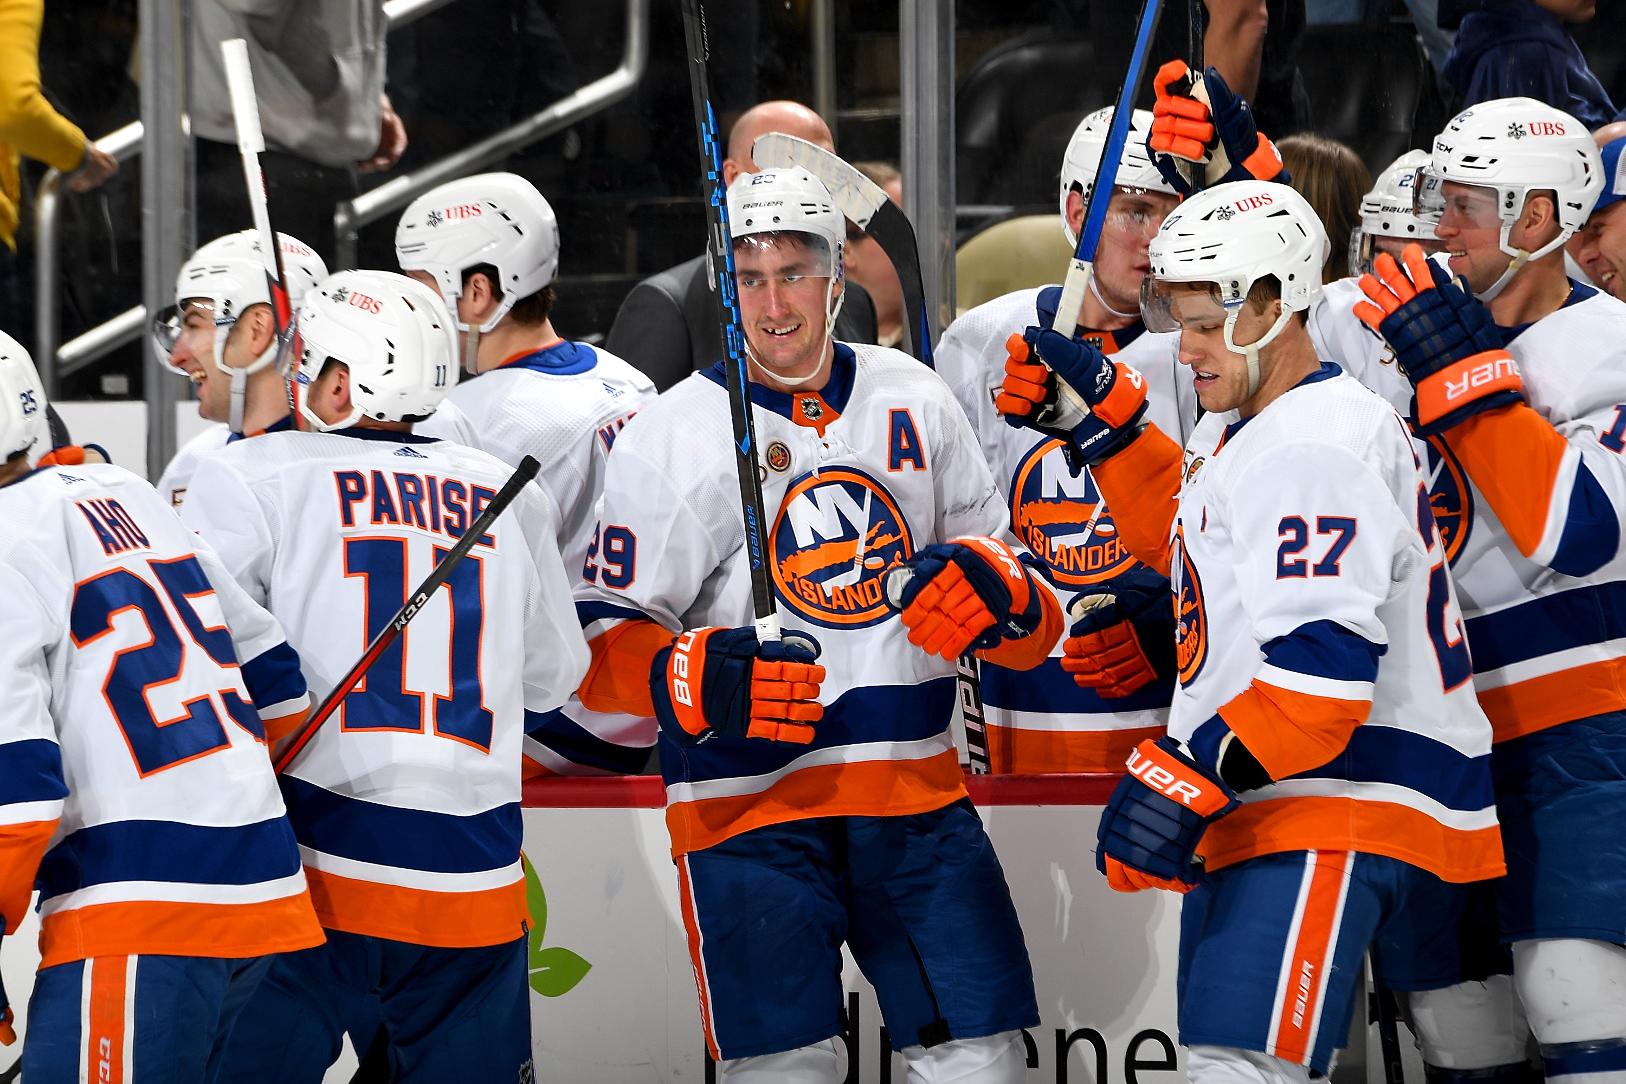 New York Islanders forward Brock Nelson and teammates celebrating after his overtime goal against the Penguins (Photo courtesy of New York Islanders website)